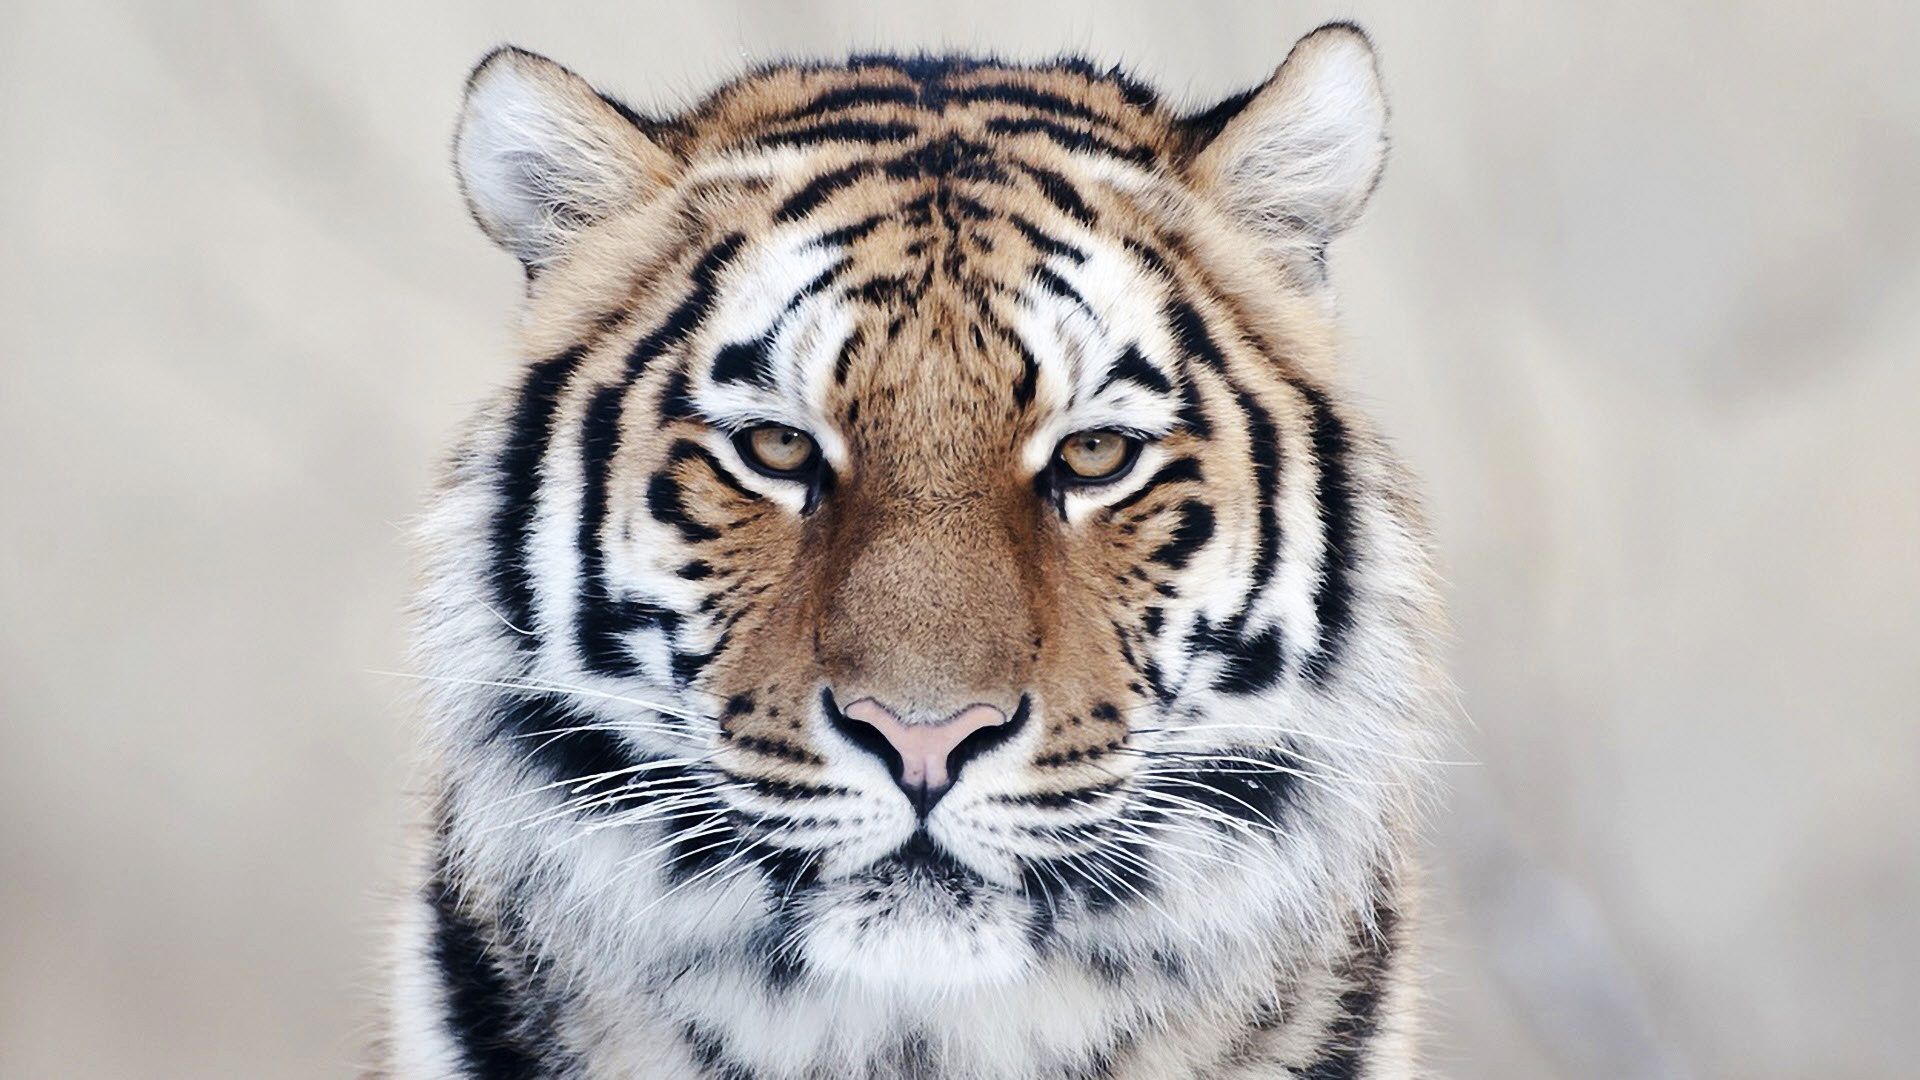 Tiger Close Up Wallpapers | HD Wallpapers